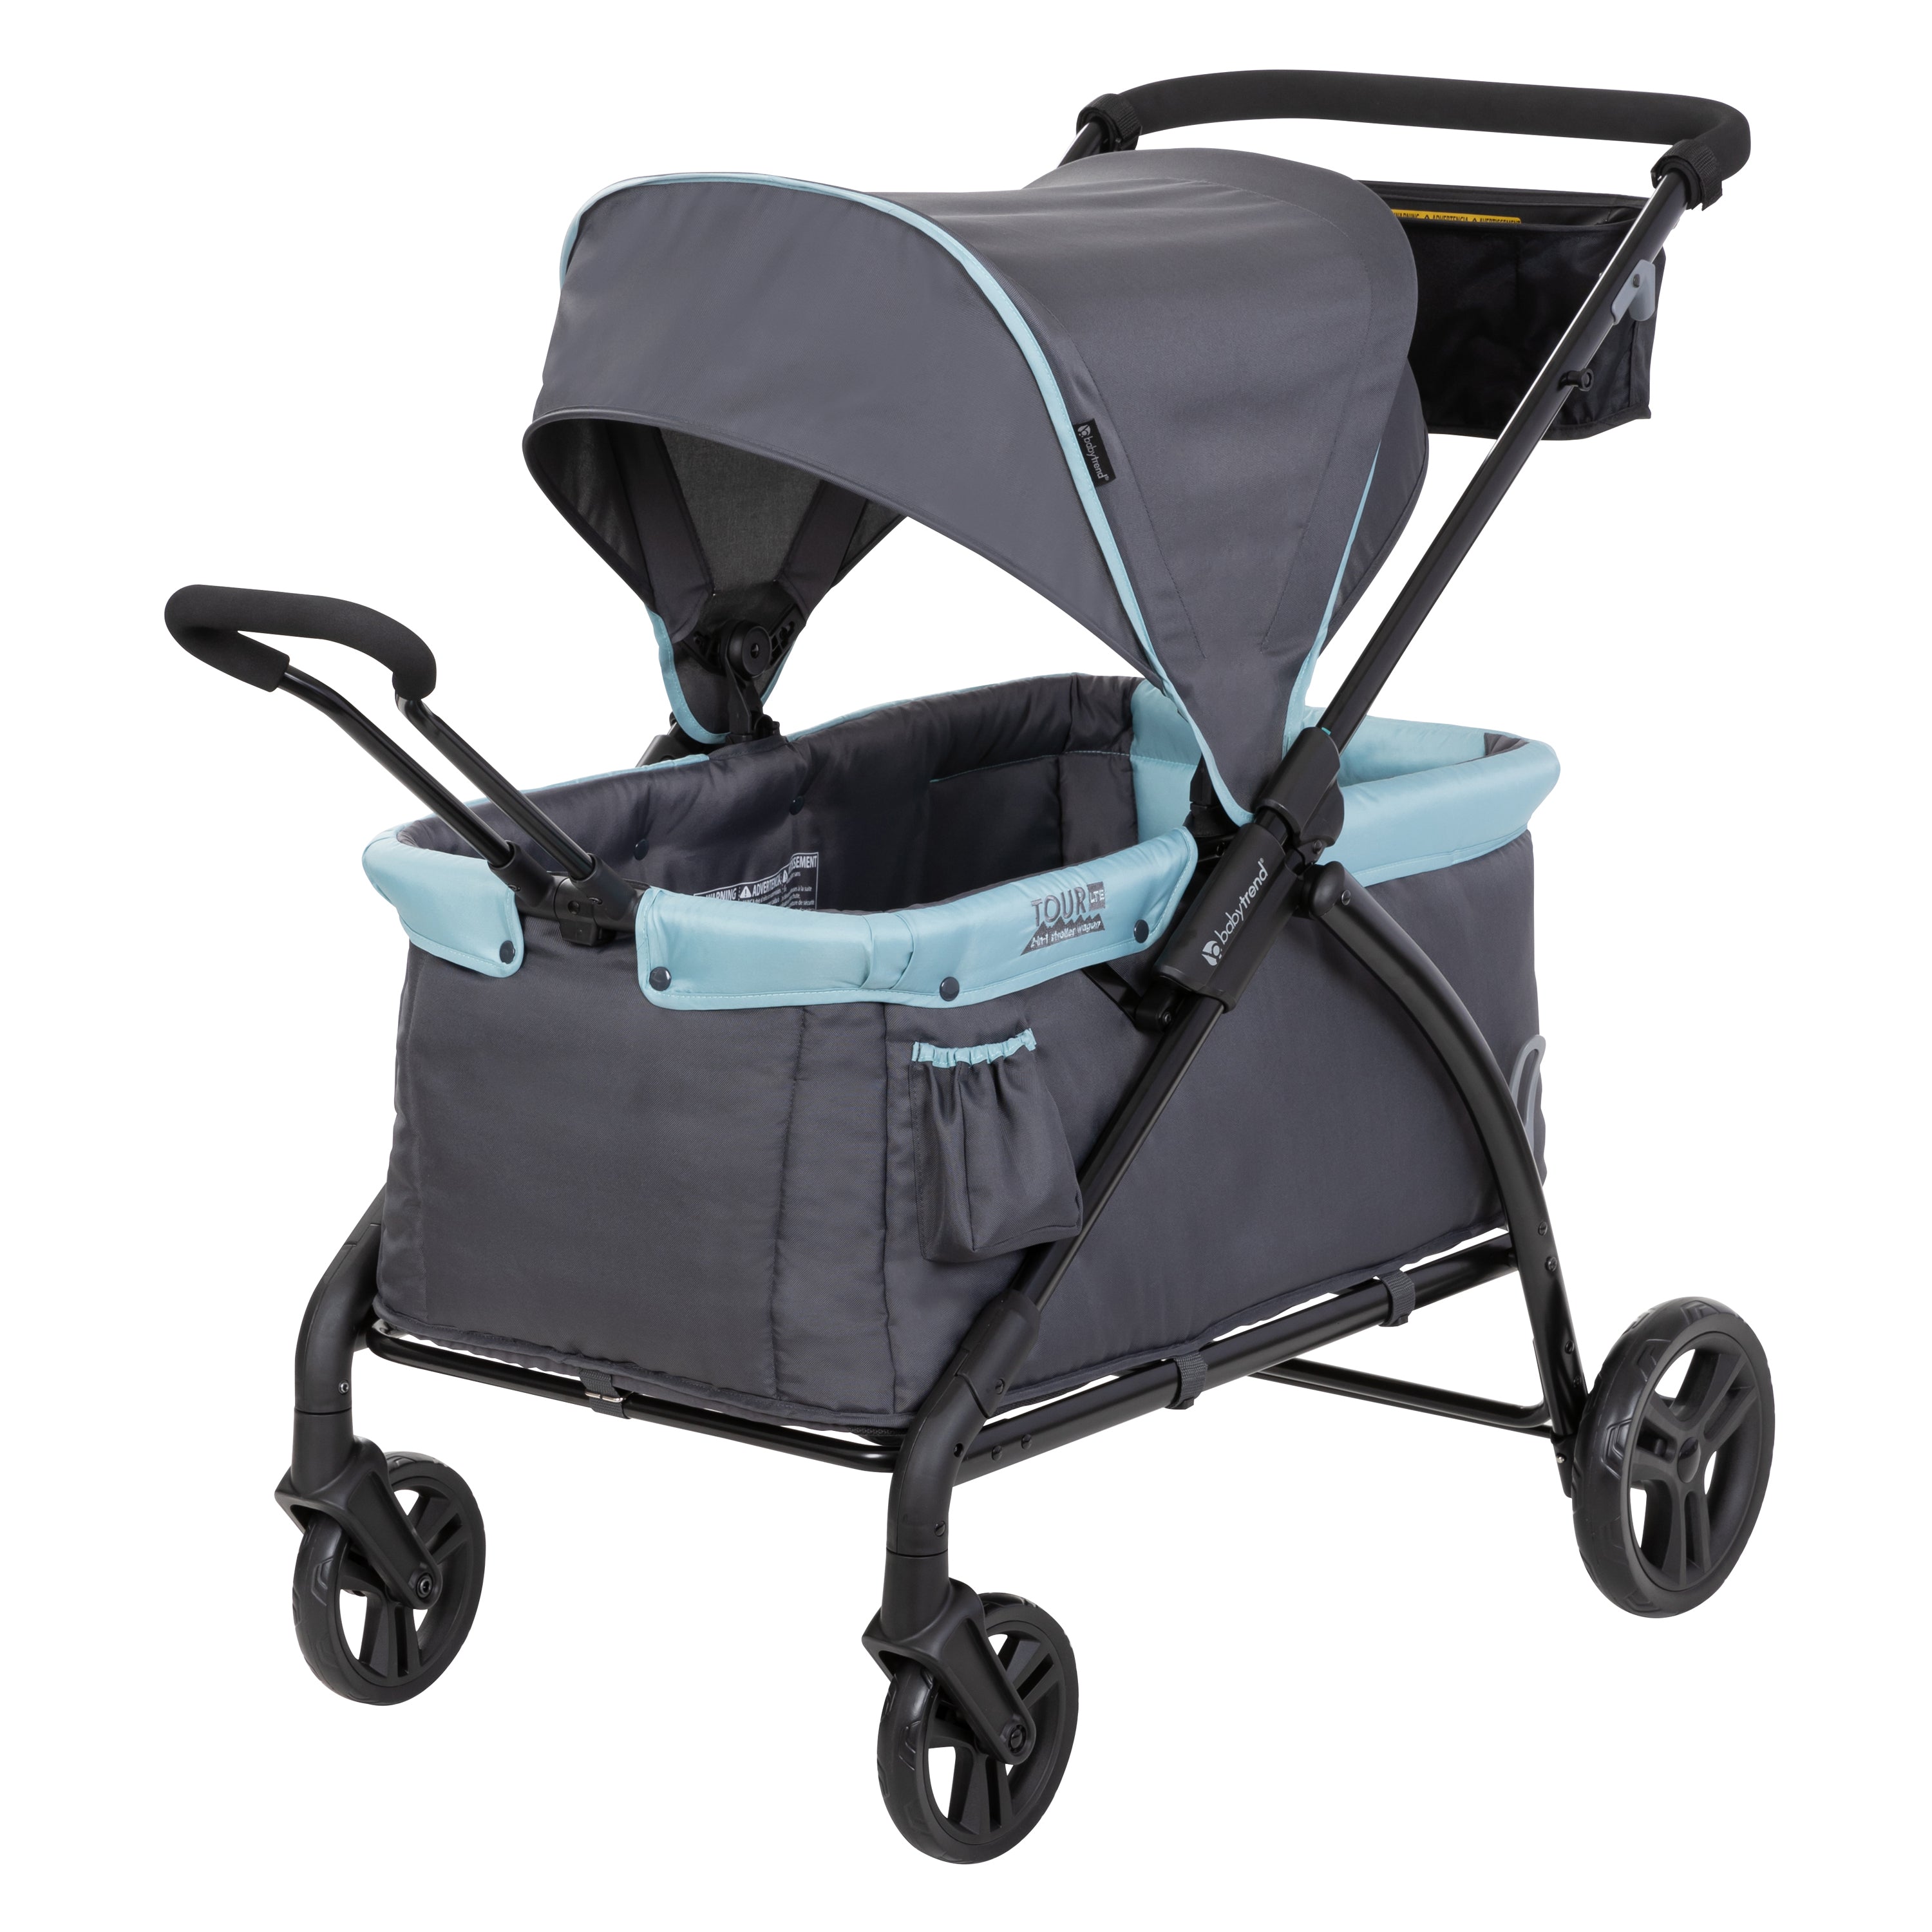 Baby Trend Strollers | Standard | All-Terrain | Jogger | Wagon